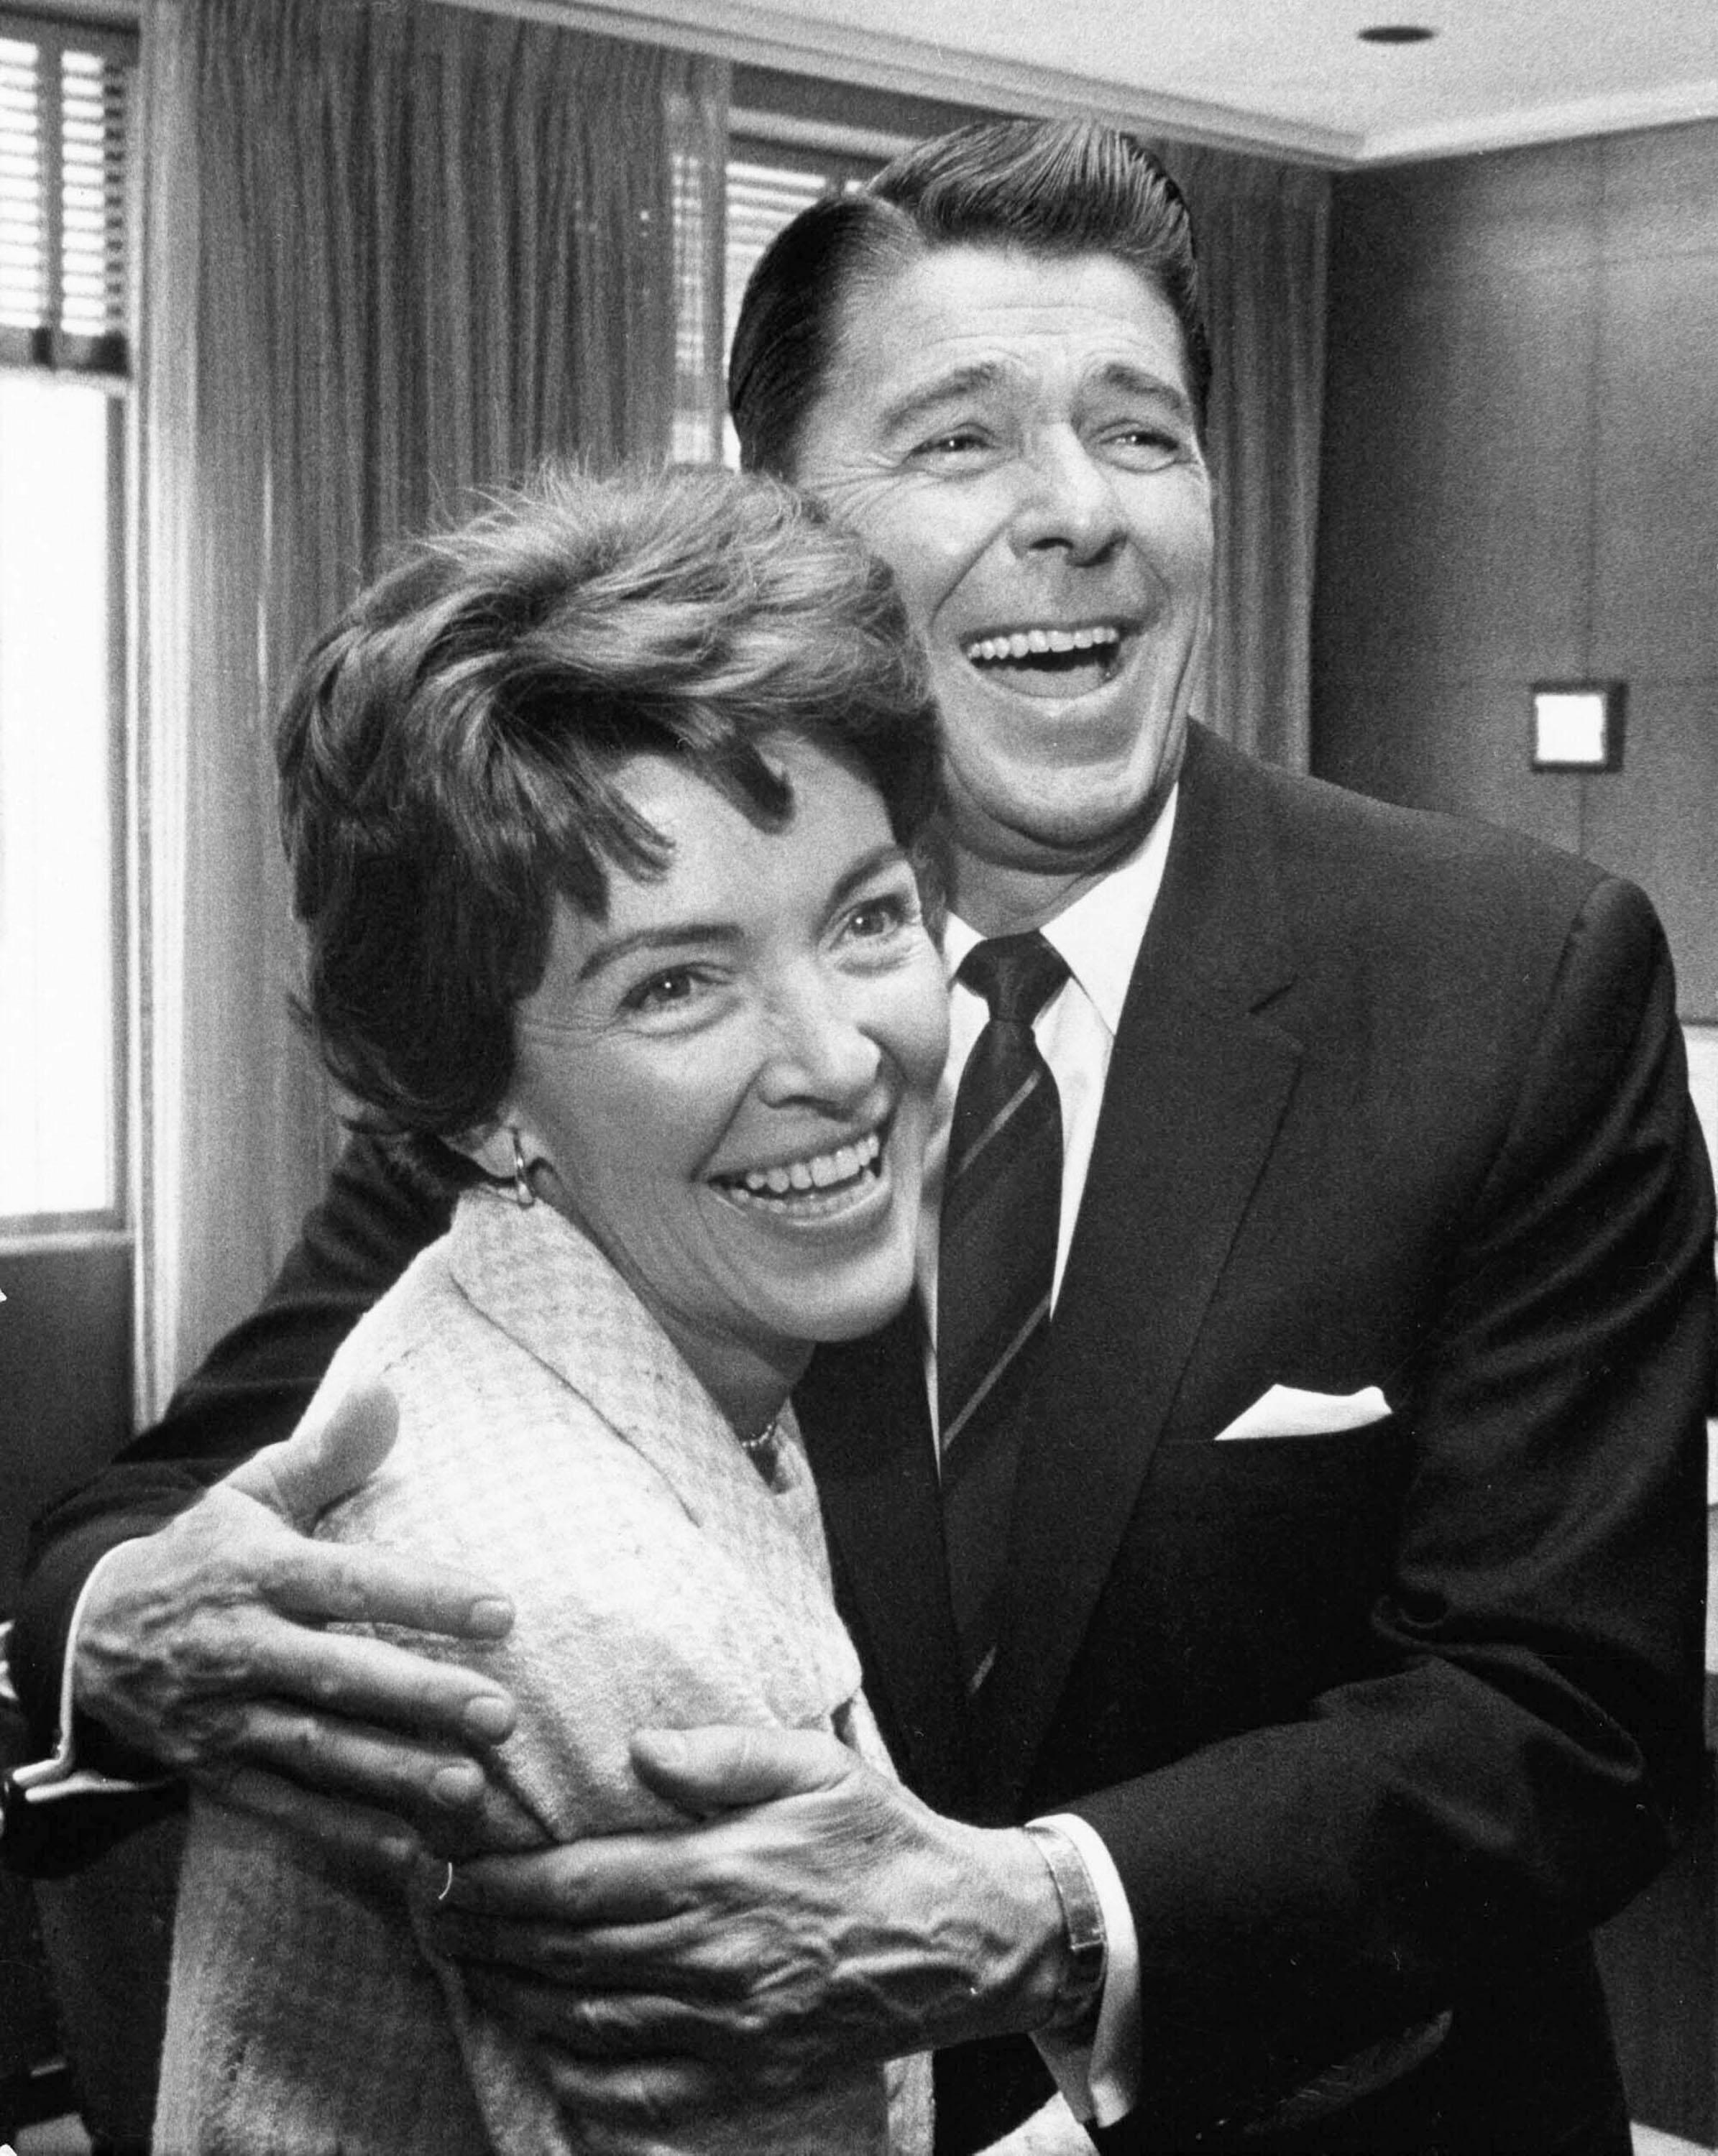 Nancy Reagan history the real story of her time in Hollywood. photo